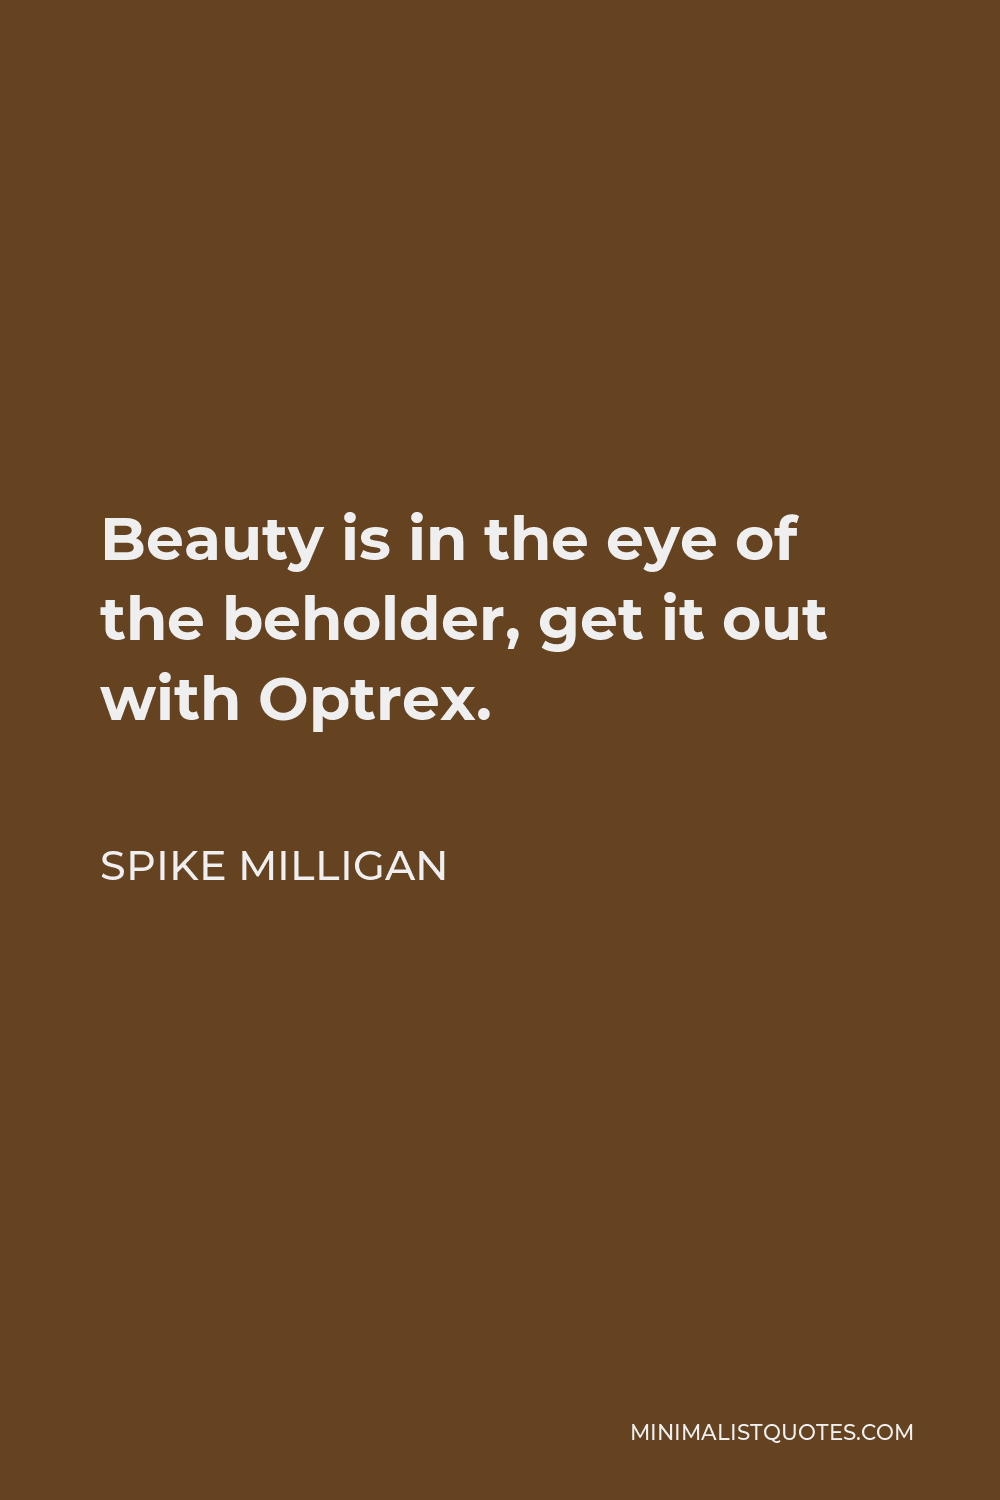 Spike Milligan Quote - Beauty is in the eye of the beholder, get it out with Optrex.